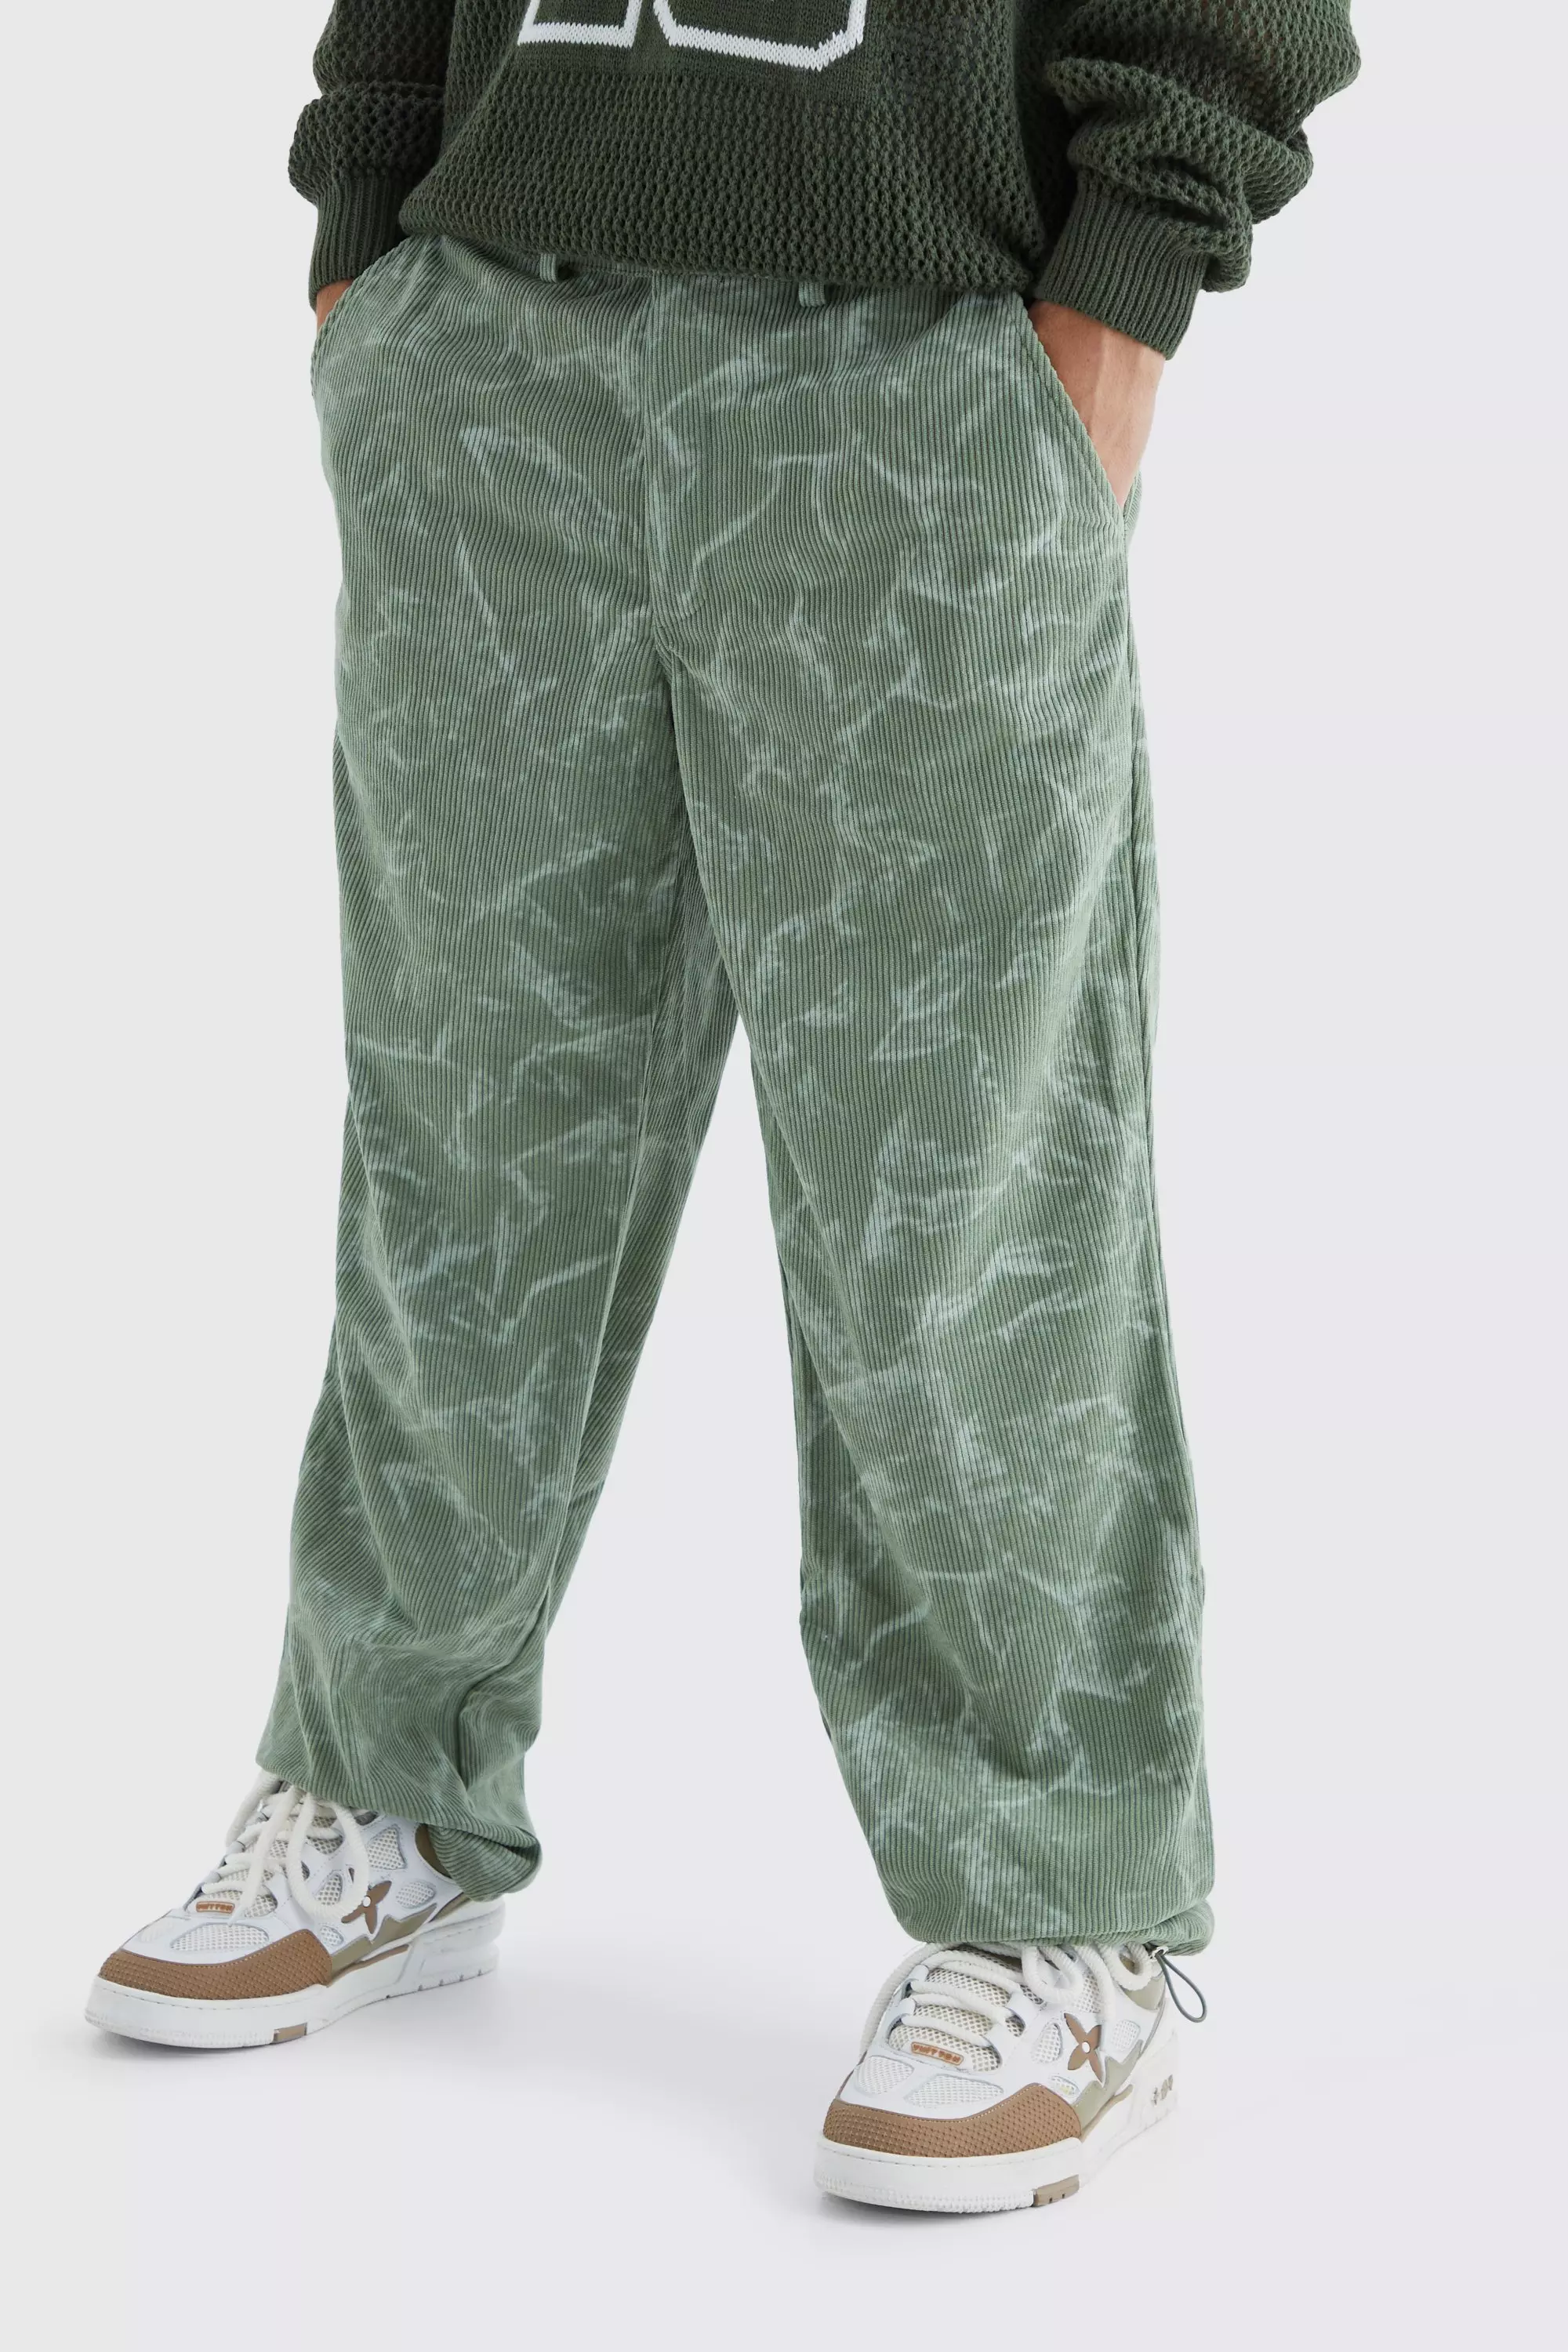 Green Fixed Waist Relaxed Tie Dye Cord Pants